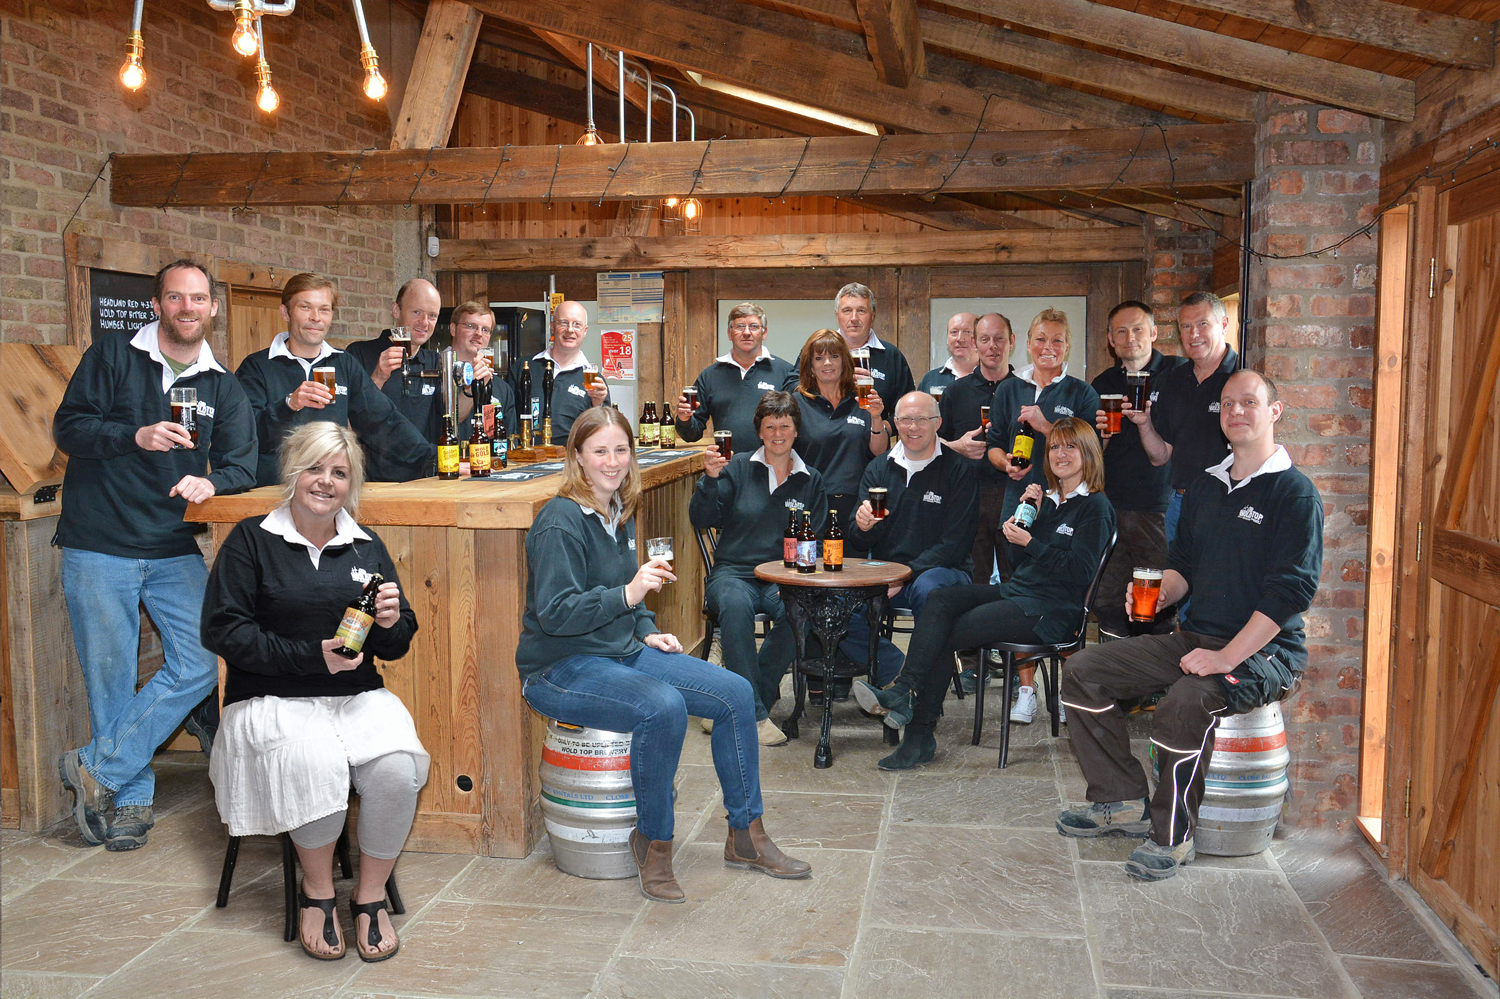 The team at Wold Top Brewery